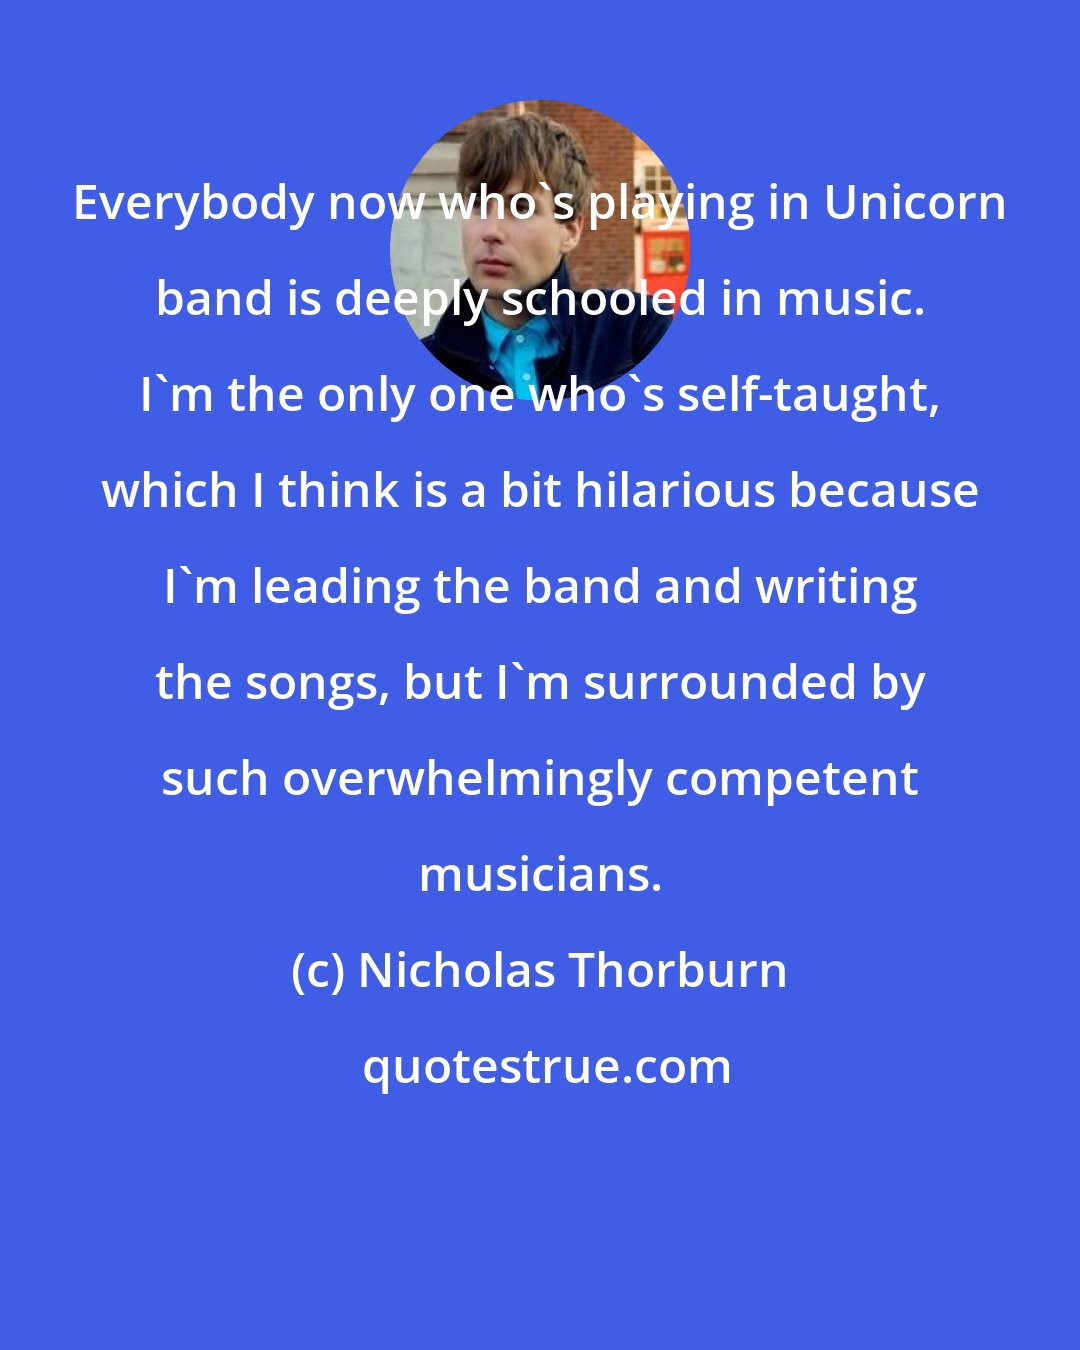 Nicholas Thorburn: Everybody now who's playing in Unicorn band is deeply schooled in music. I'm the only one who's self-taught, which I think is a bit hilarious because I'm leading the band and writing the songs, but I'm surrounded by such overwhelmingly competent musicians.